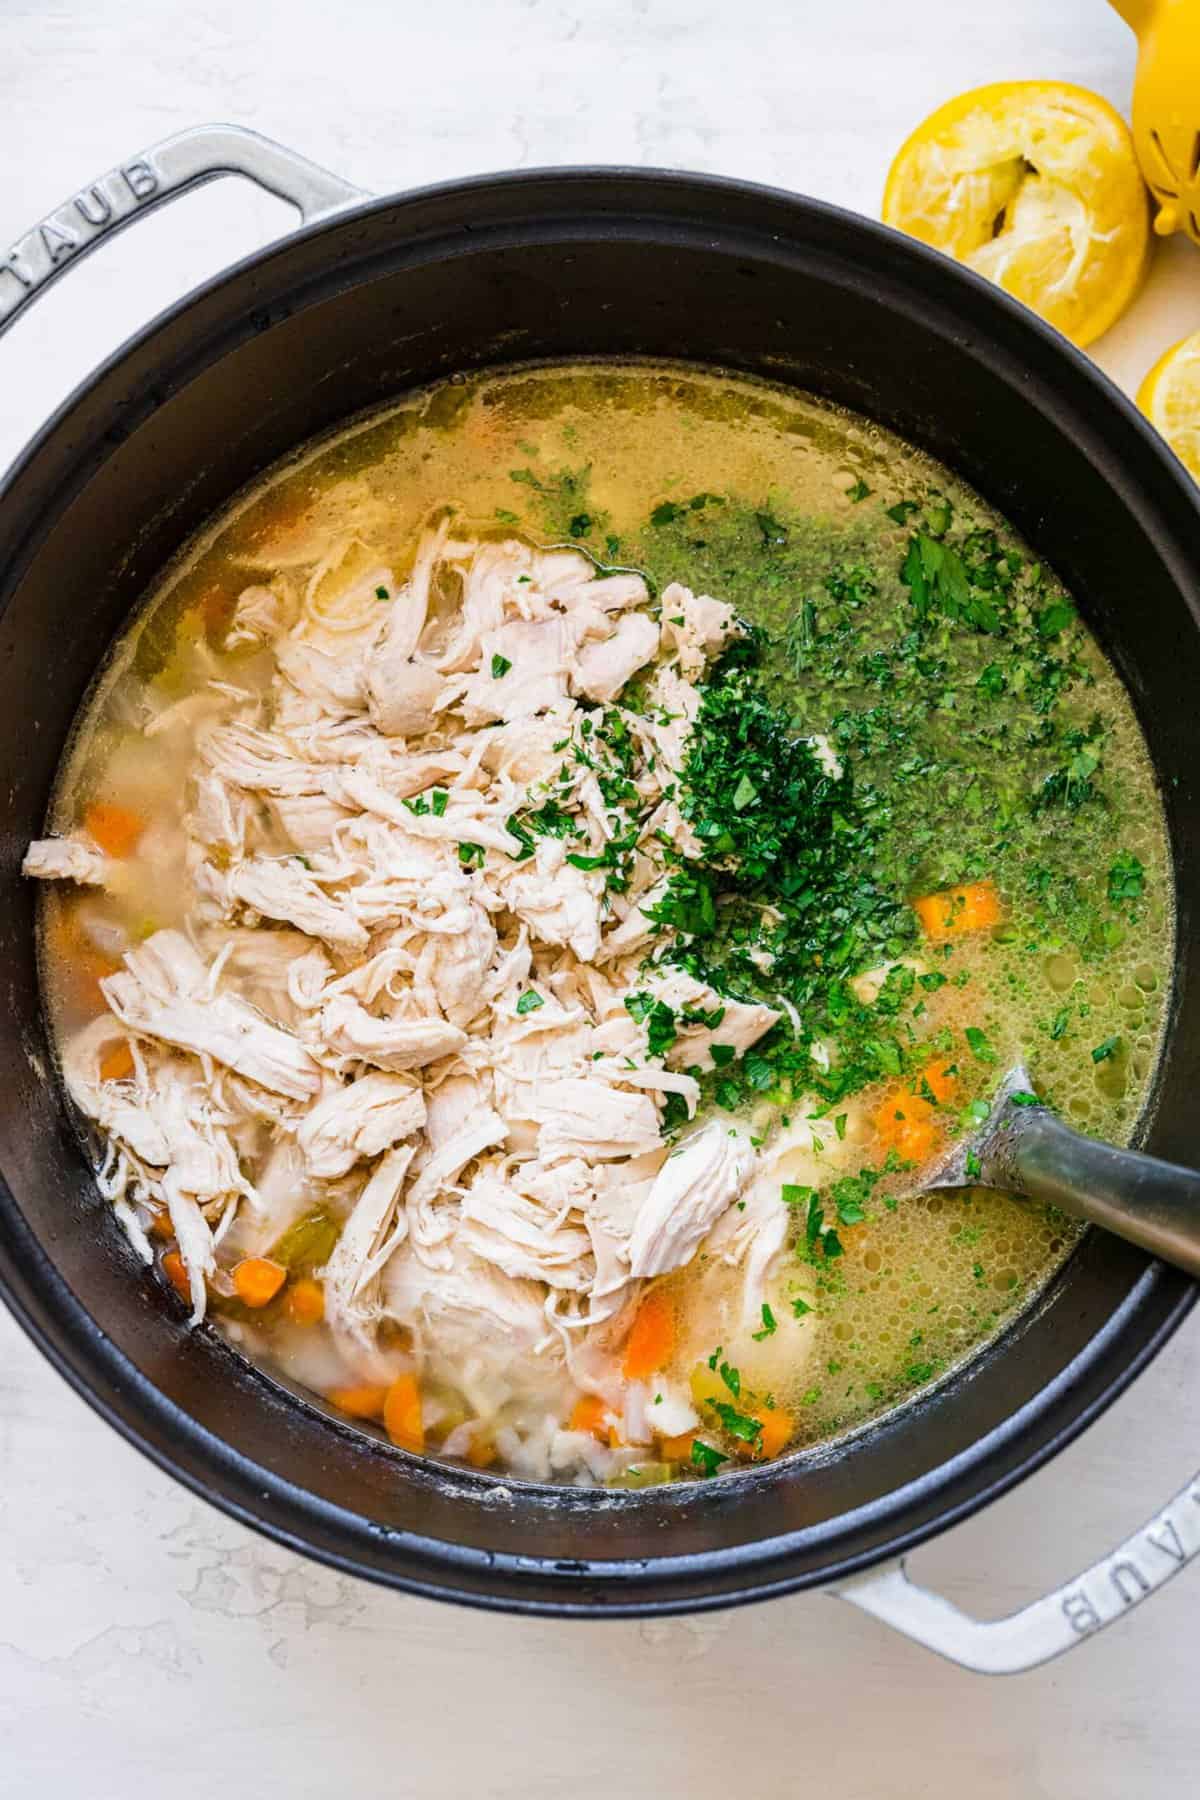 shredded chicken being added back in the large pot of soup